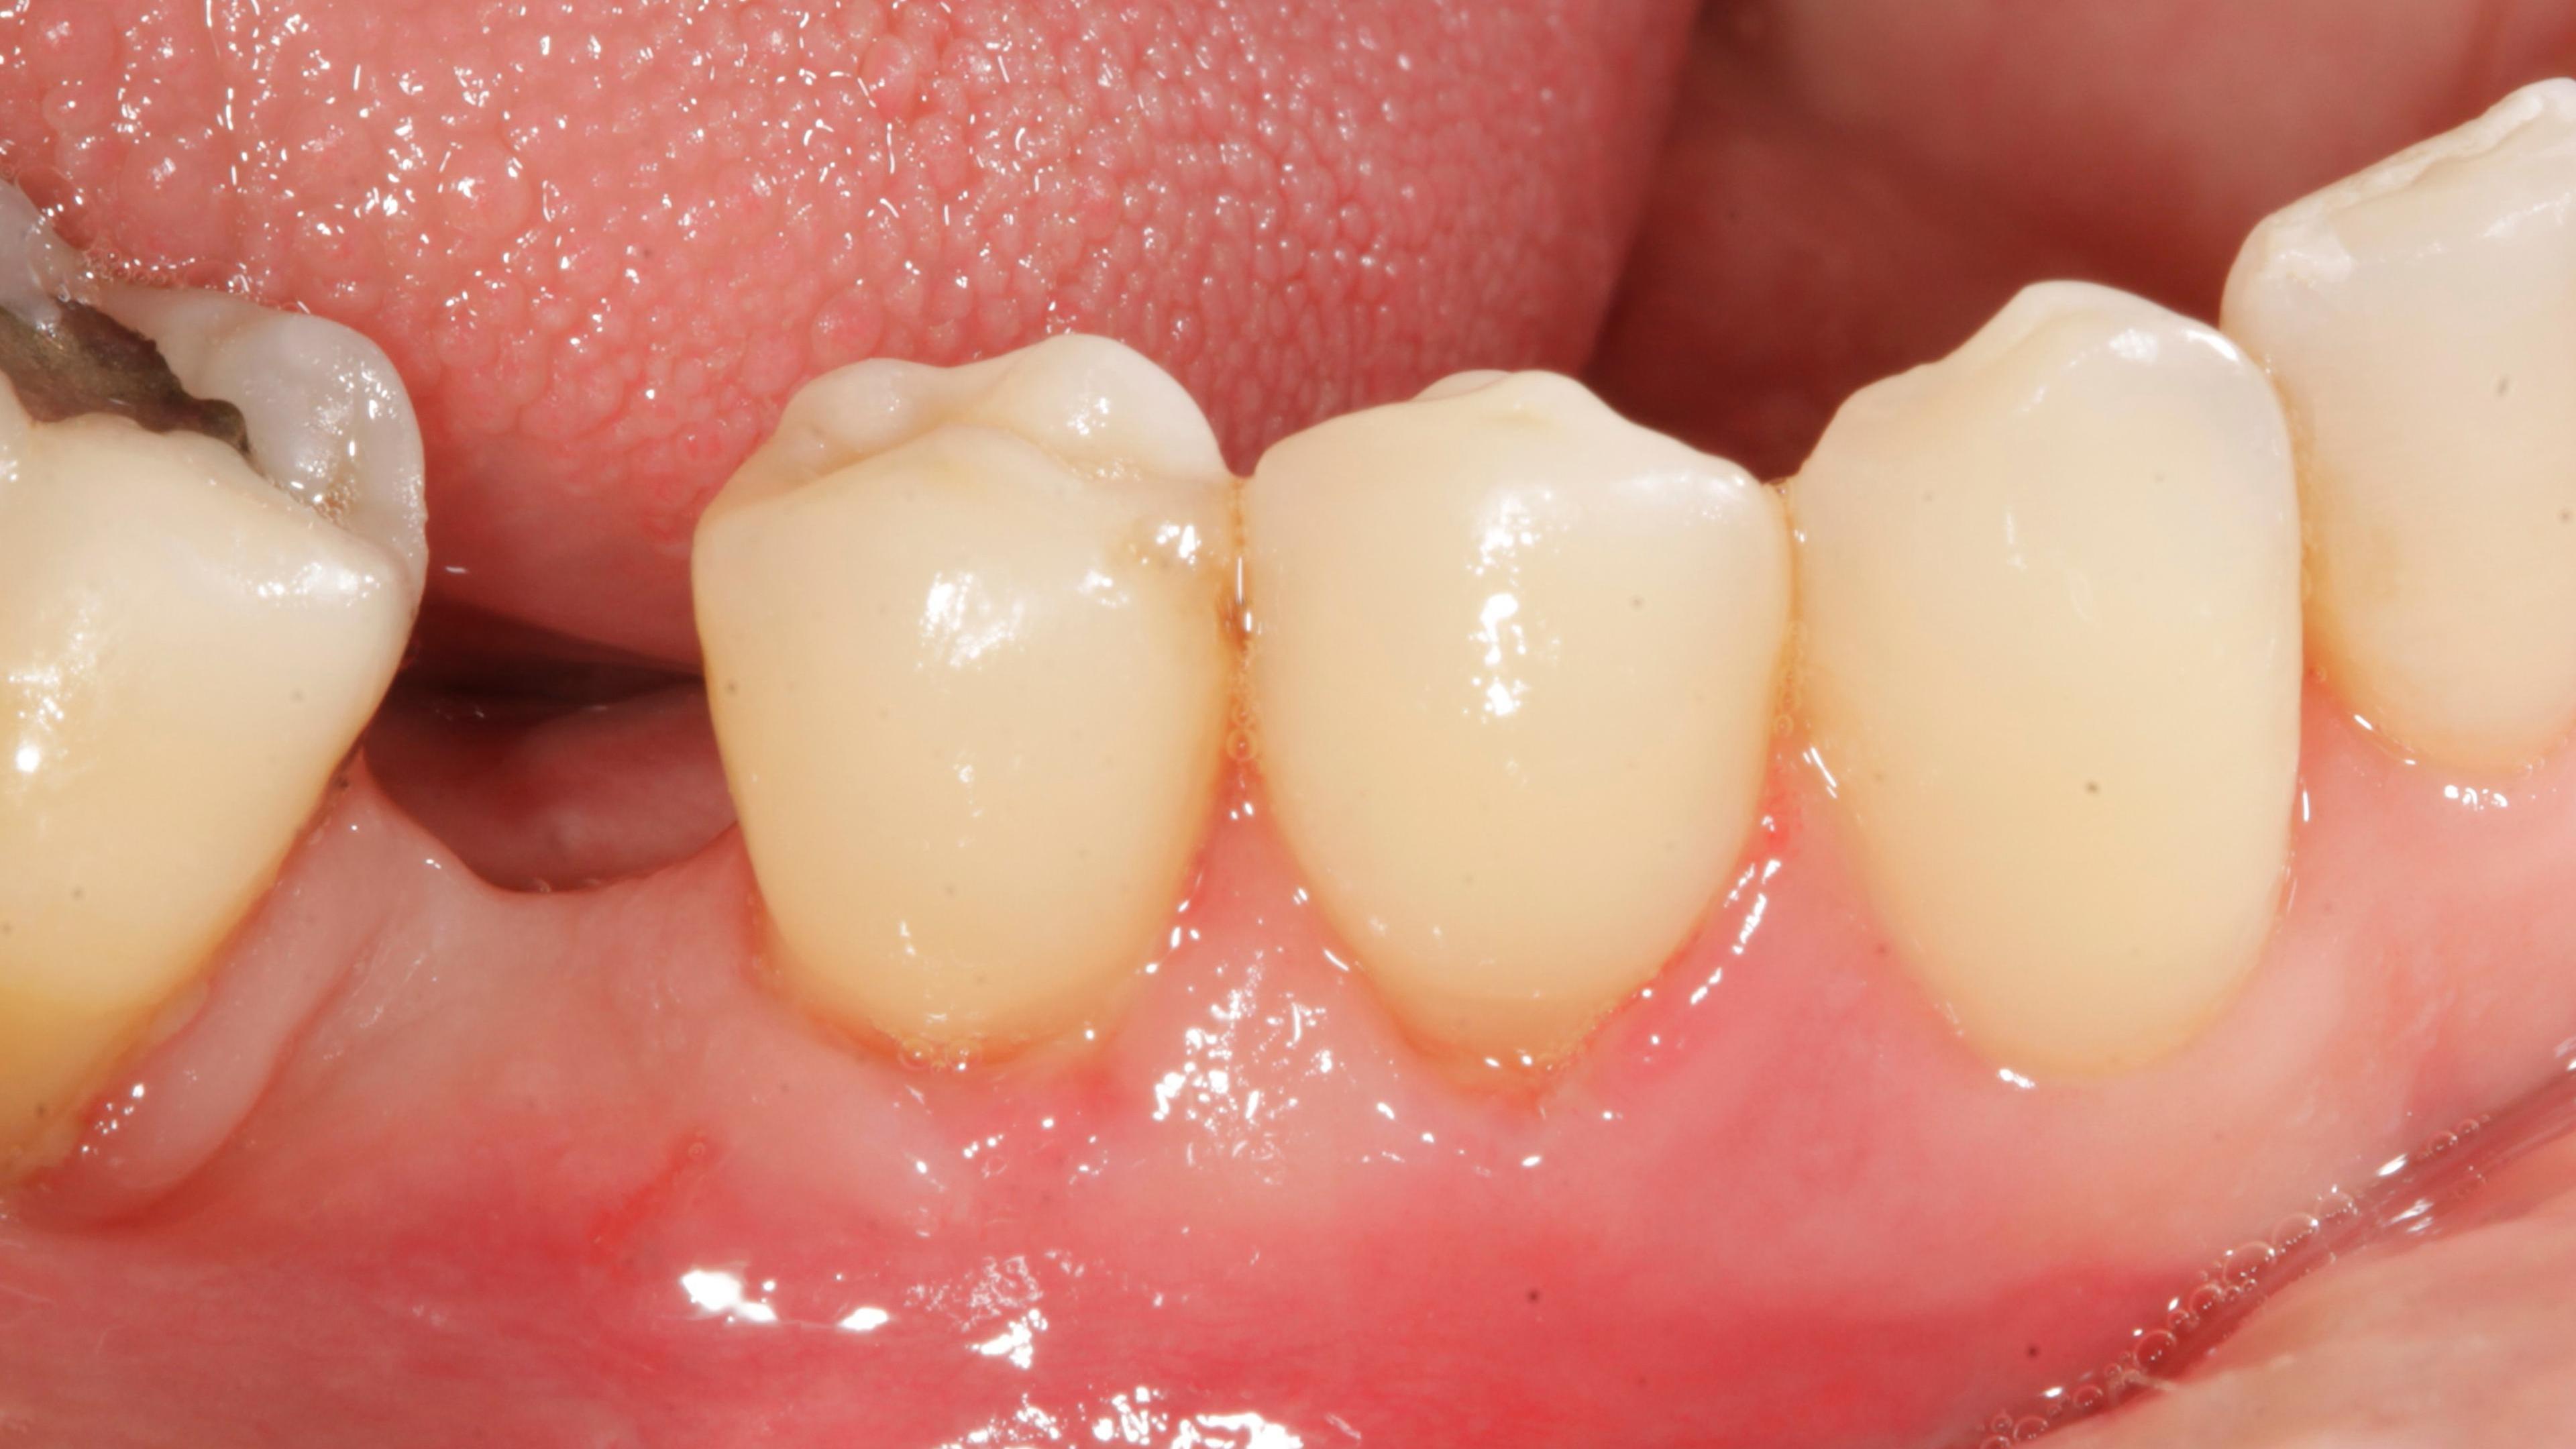 Periodontal plastic surgery After treatment - Root recessions